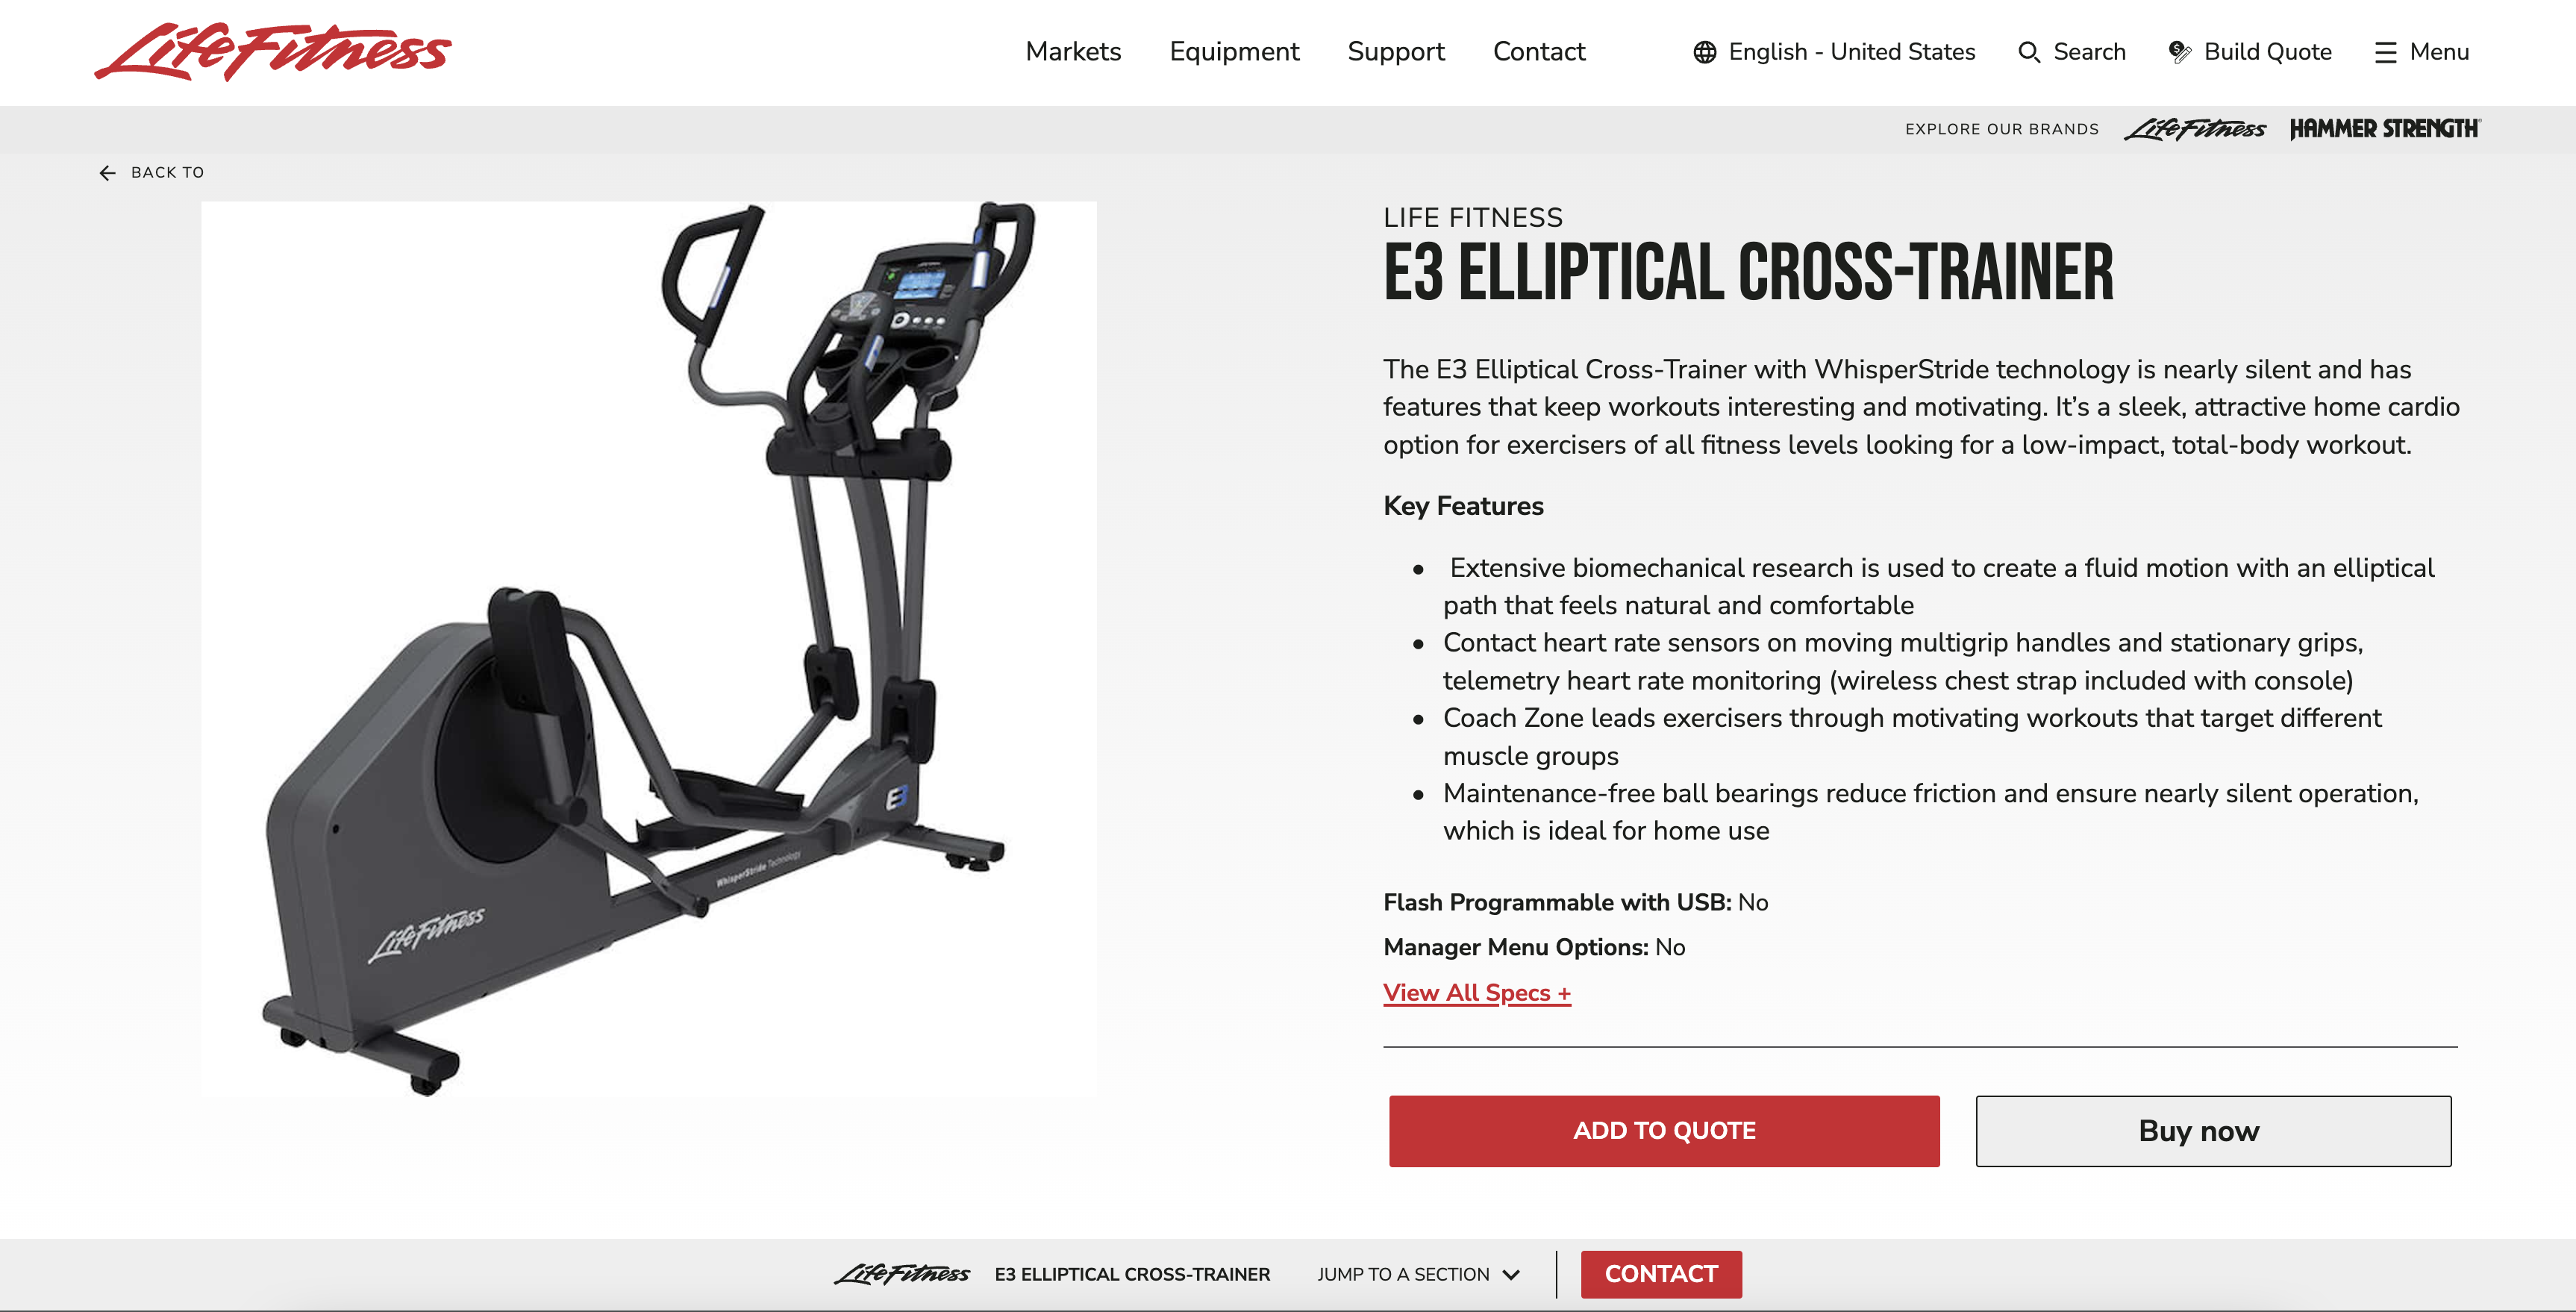 E3 Elliptical Cross-Trainer product page